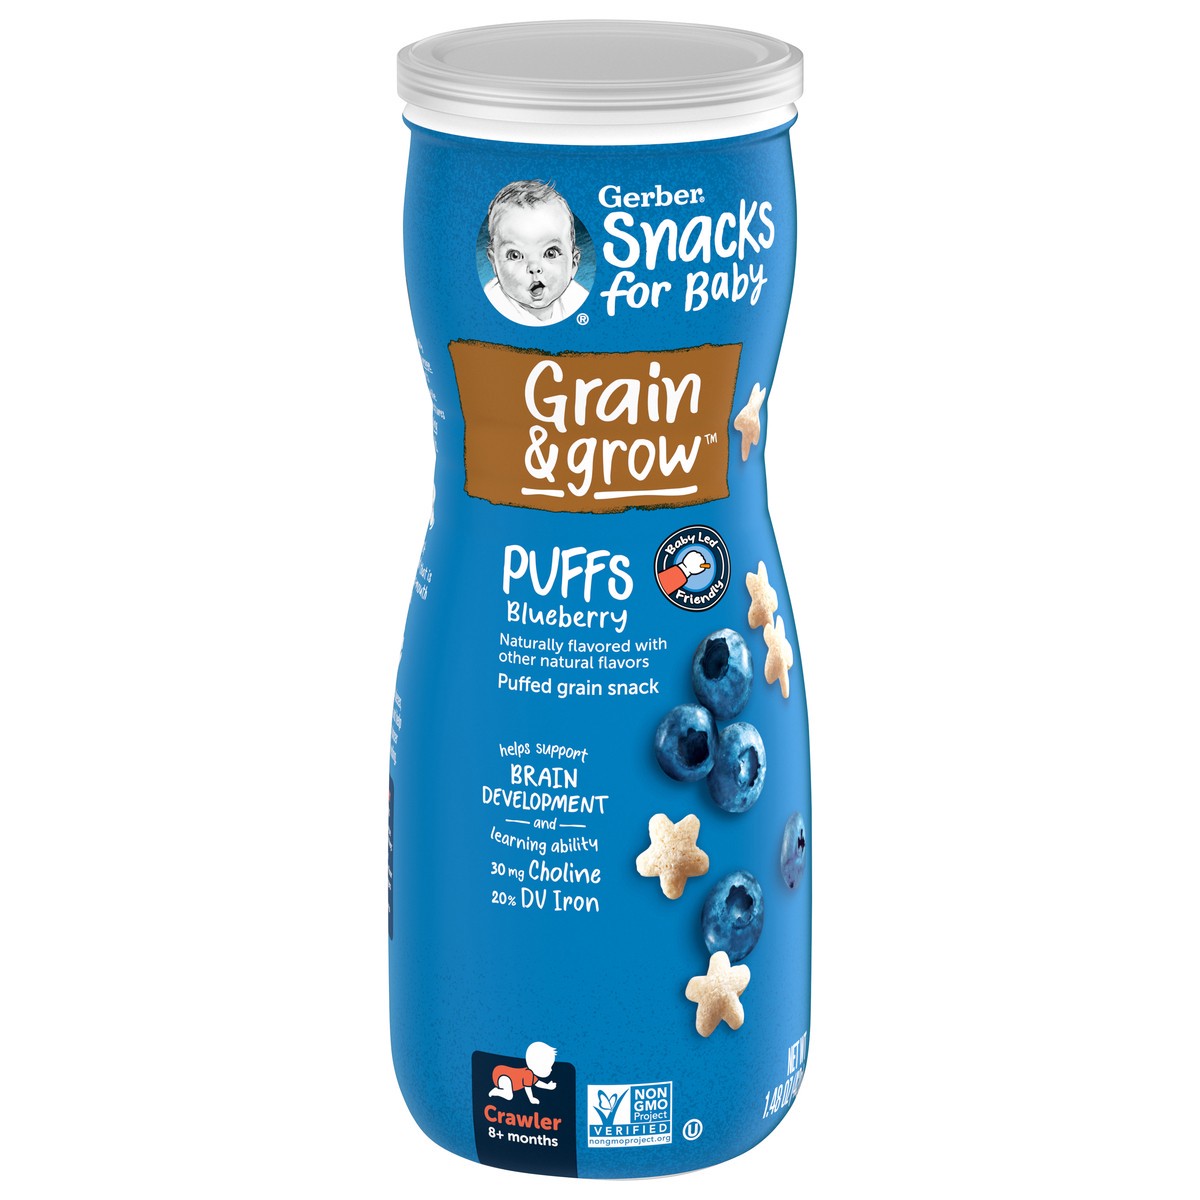 slide 7 of 9, Gerber Snacks for Baby Grain & Grow Puffs, Blueberry, 1.48 oz Canister, 1.48 oz